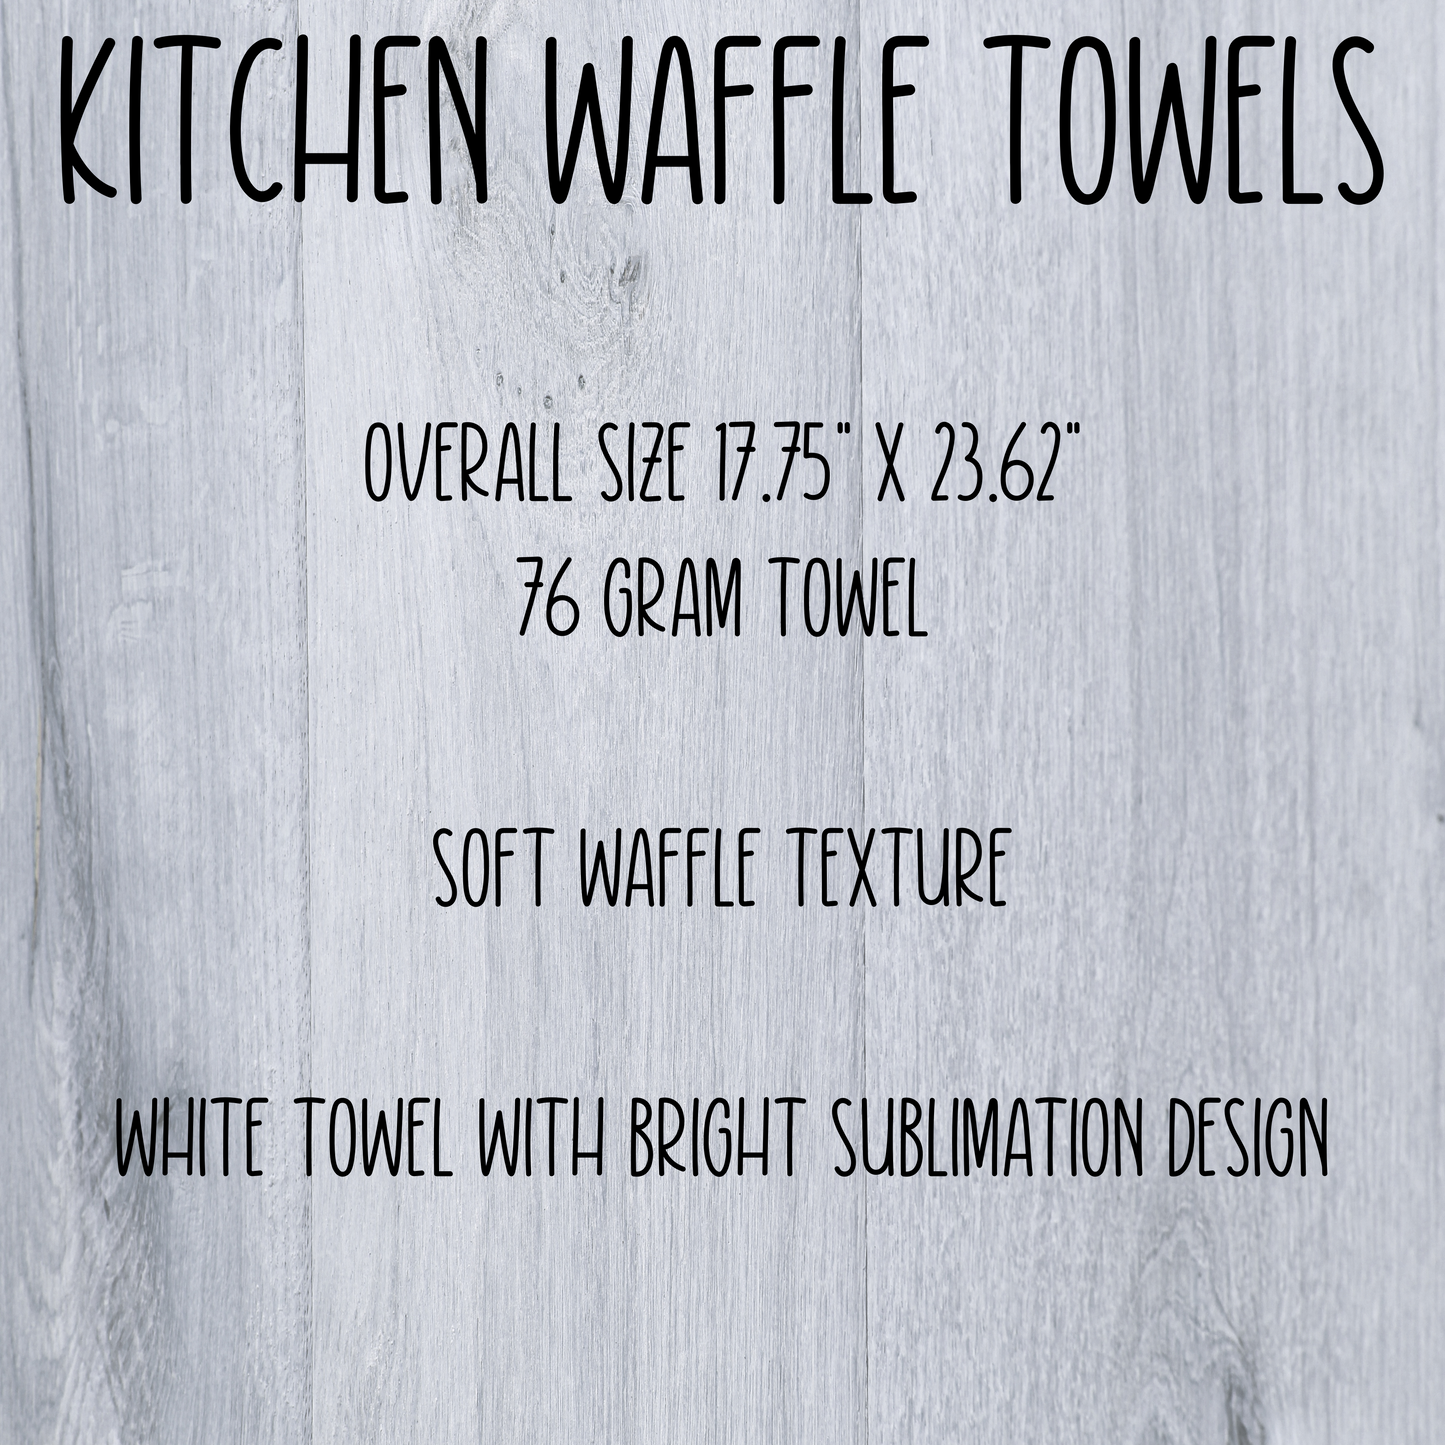 This Kitchen is for Dancing - Vintage Style Kitchen Waffle Towel